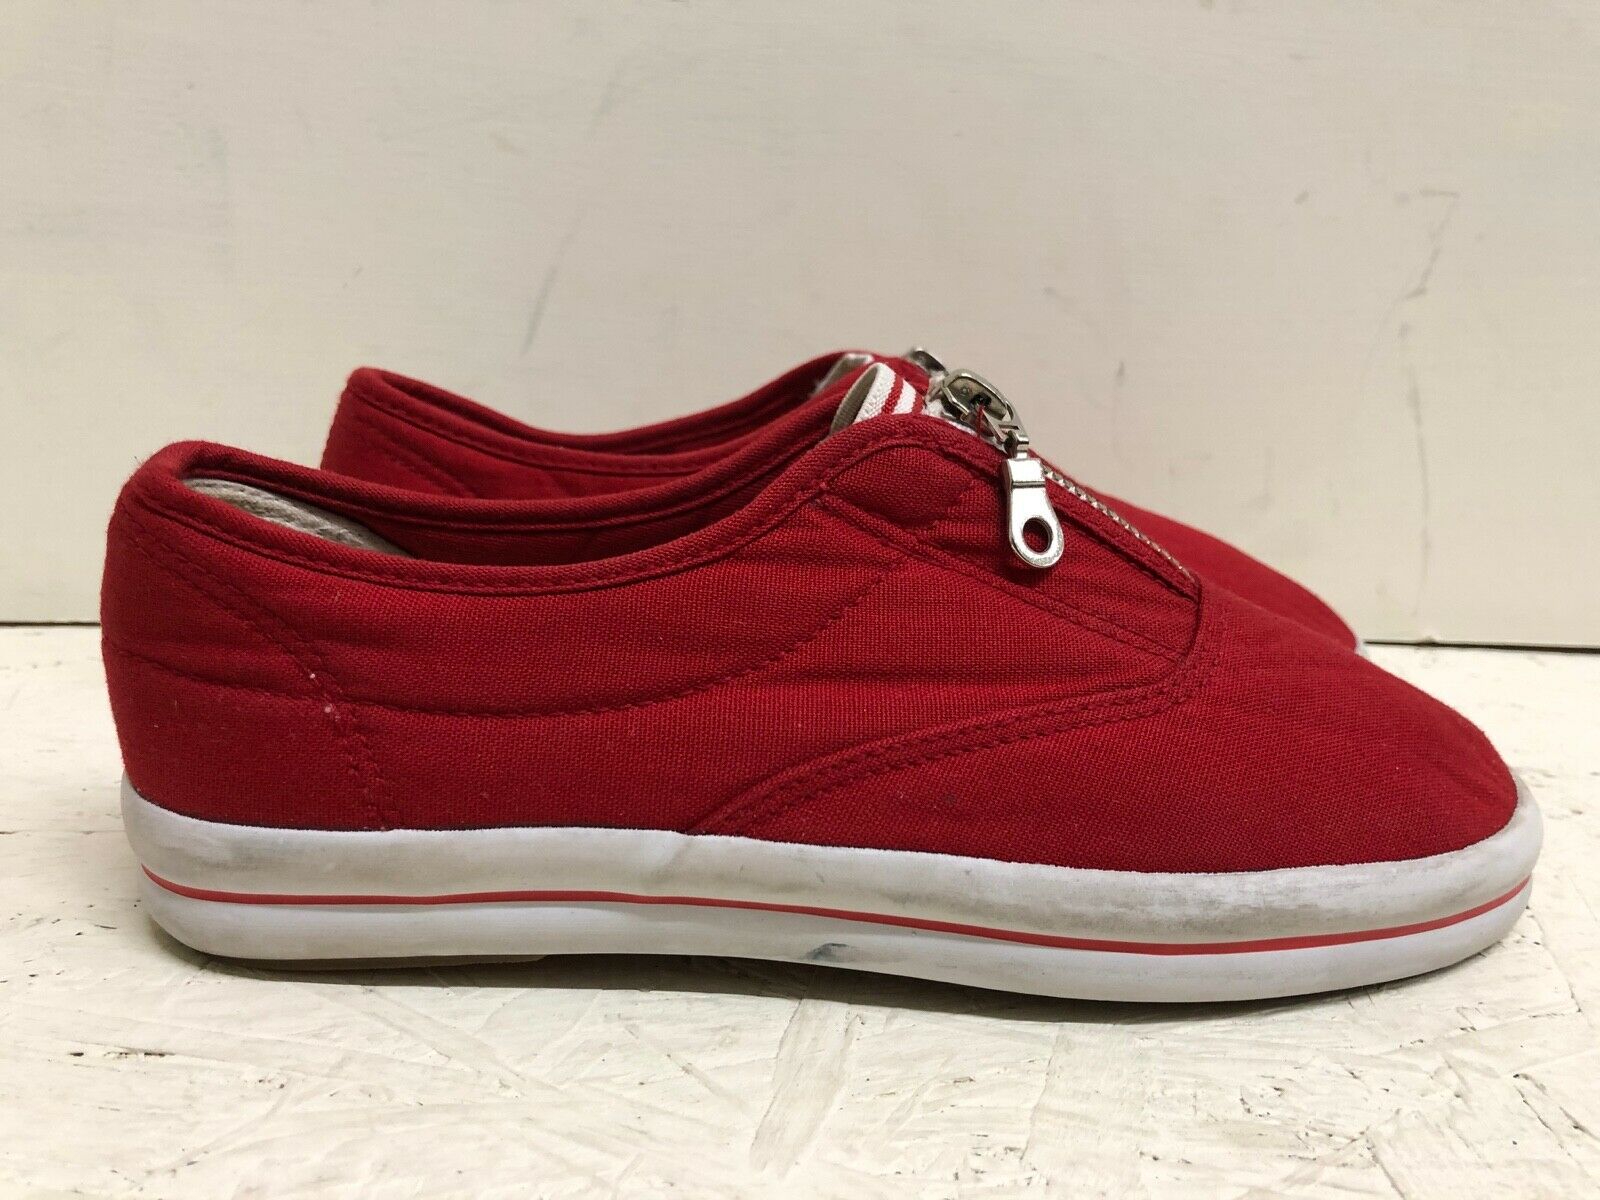 BALOONS Sneakers Boat Shoes Red Cotton Zip Up Women's Size US 8 Rubber Soles